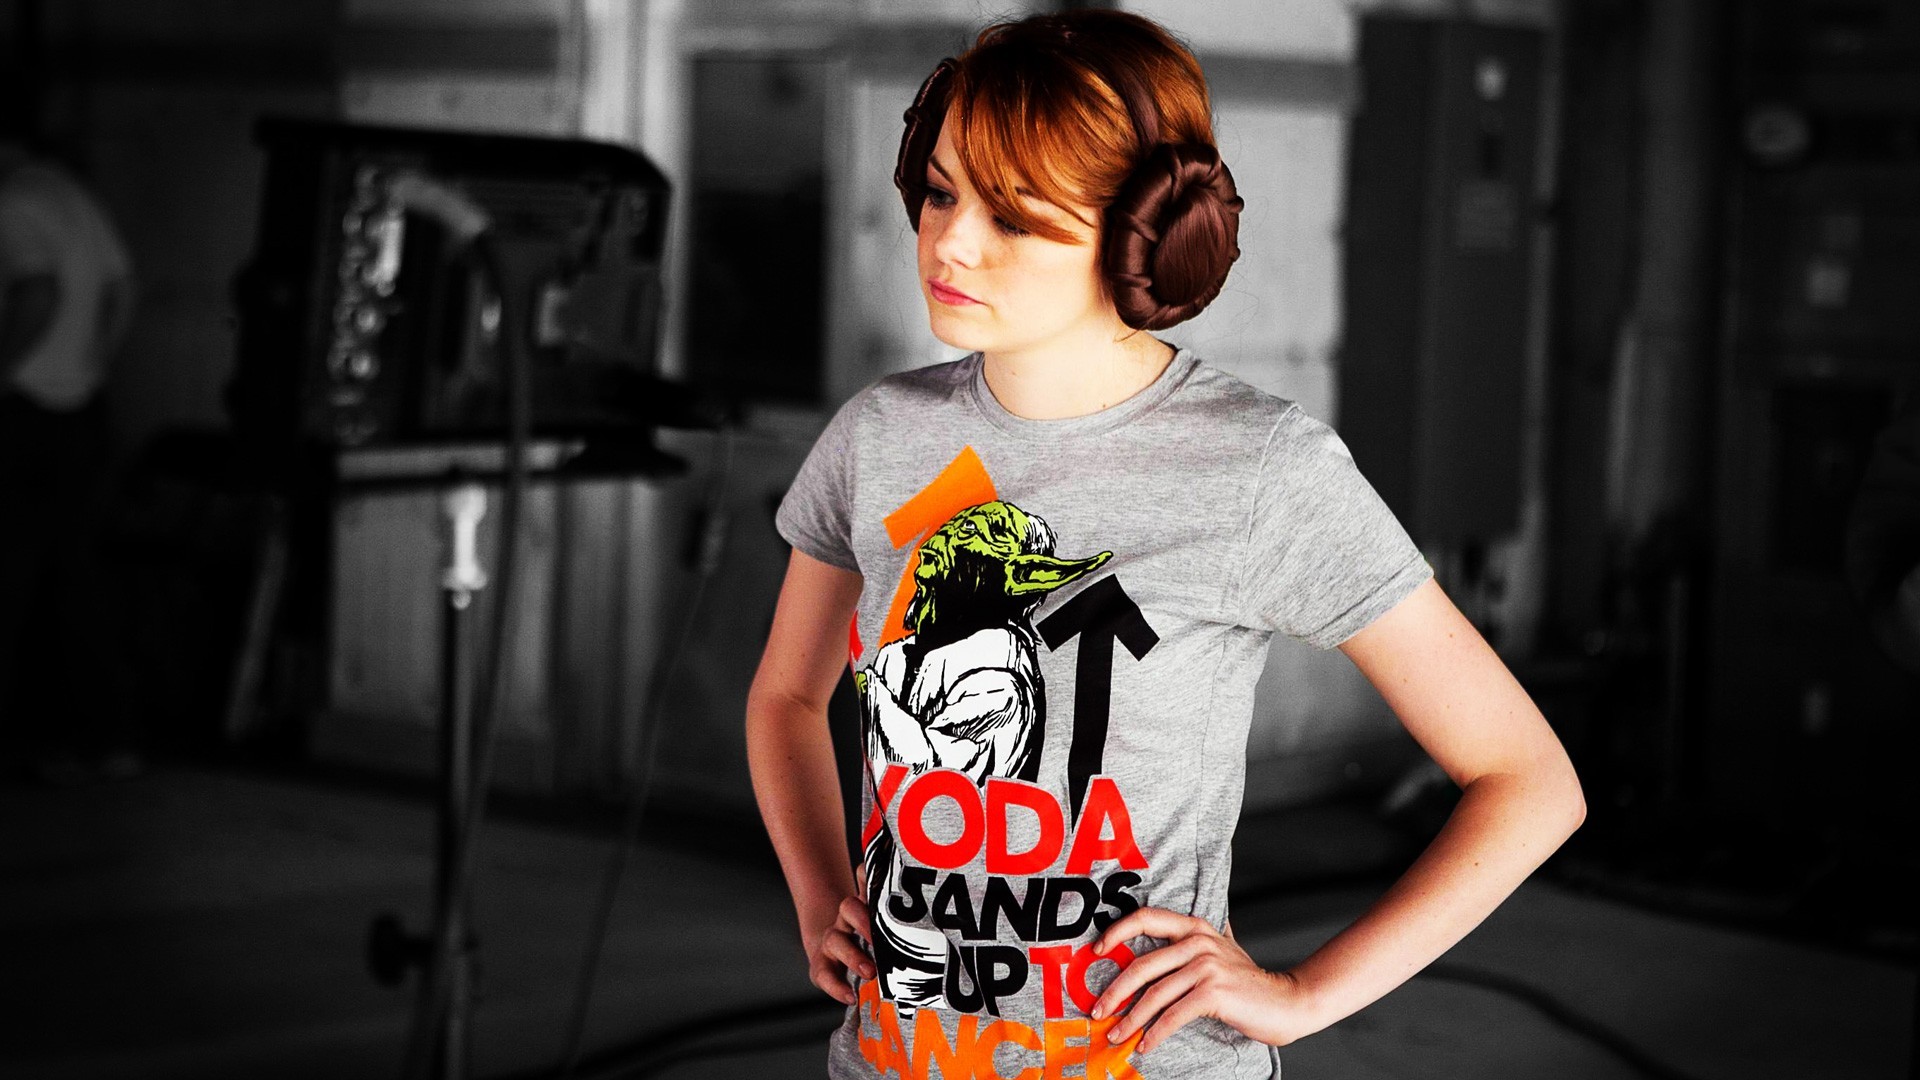 Emma Stone Star Wars Actress Selective Coloring Women Hands On Hips Grey T Shirt Young Woman 1920x1080